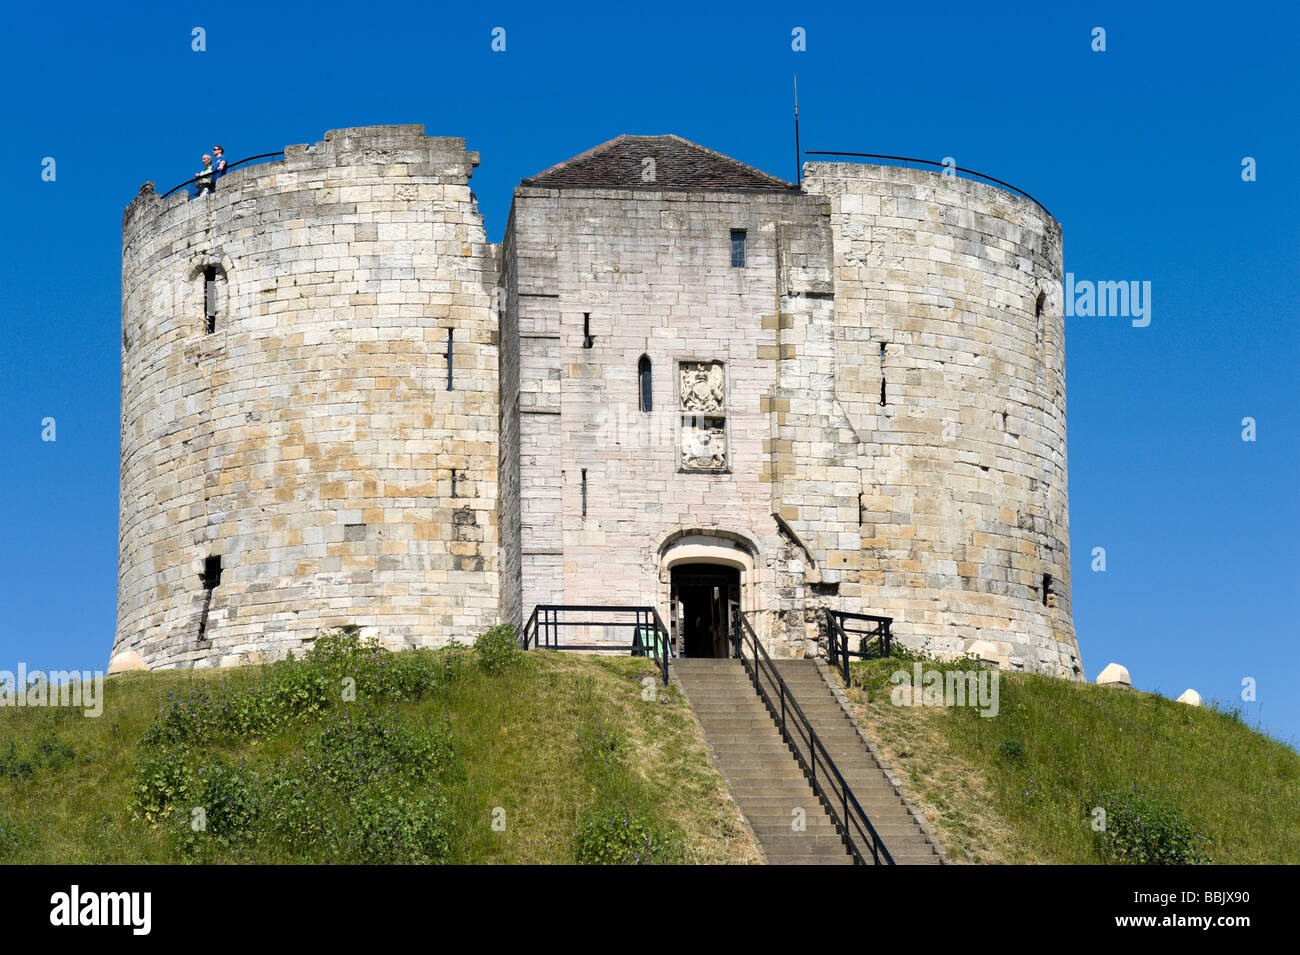 Clifford's Tower (a part of the old York Castle), York, North Yorkshire, England Stock Photo